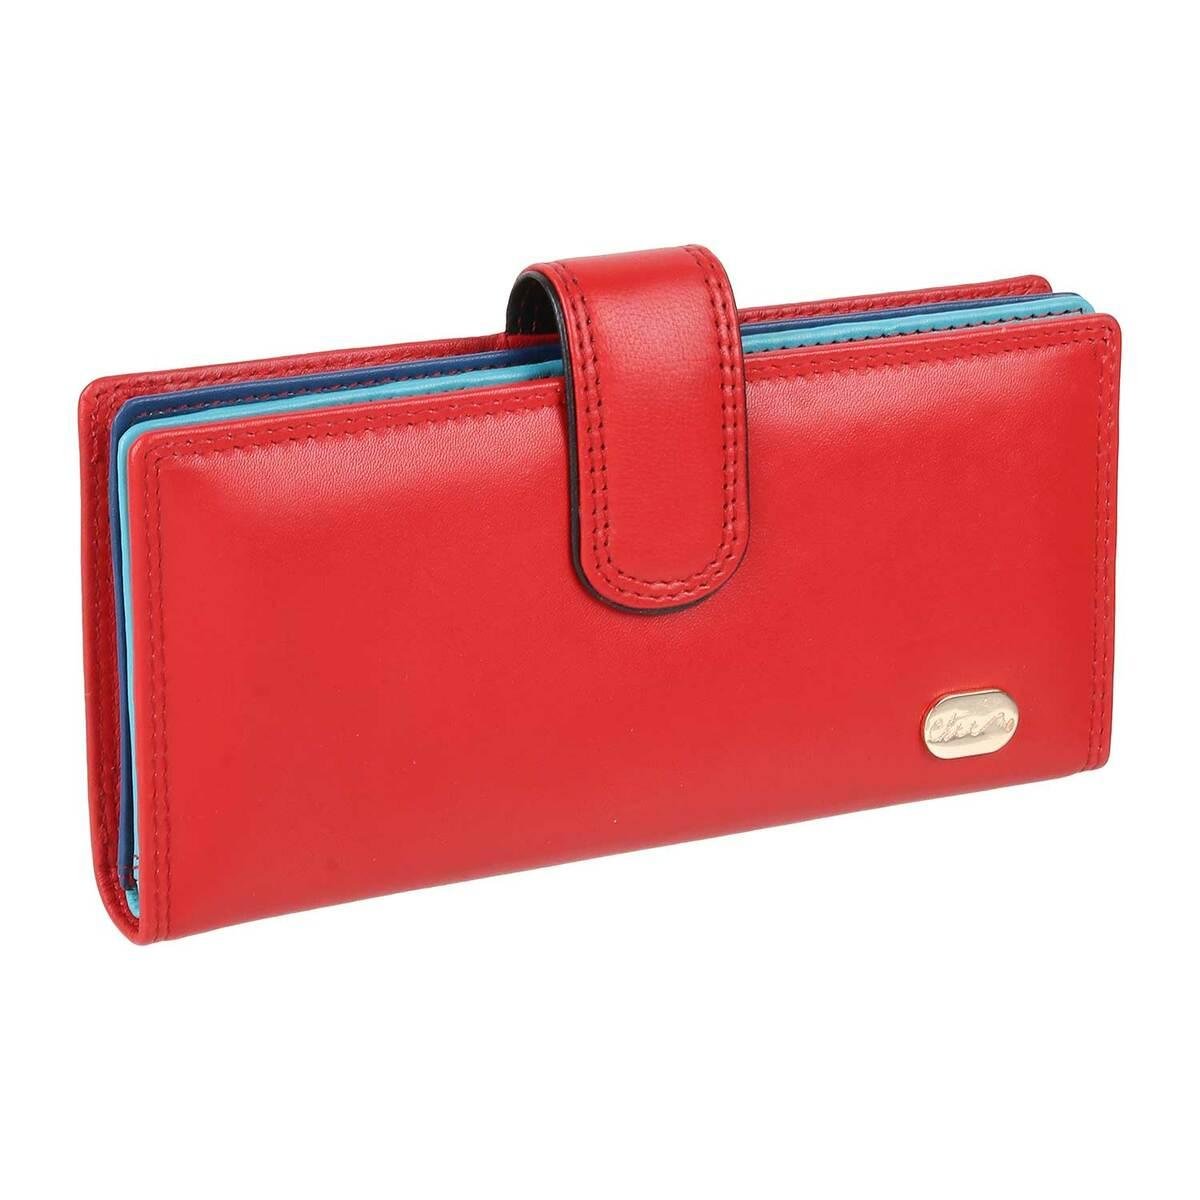 Buy Women's Genuine Leather Wallet-Long Purse Wallet with Multiple Card  Slots,Zip Pocket and Note Compartment-Red Leather Clutch Wallet by Calfnero  at Amazon.in